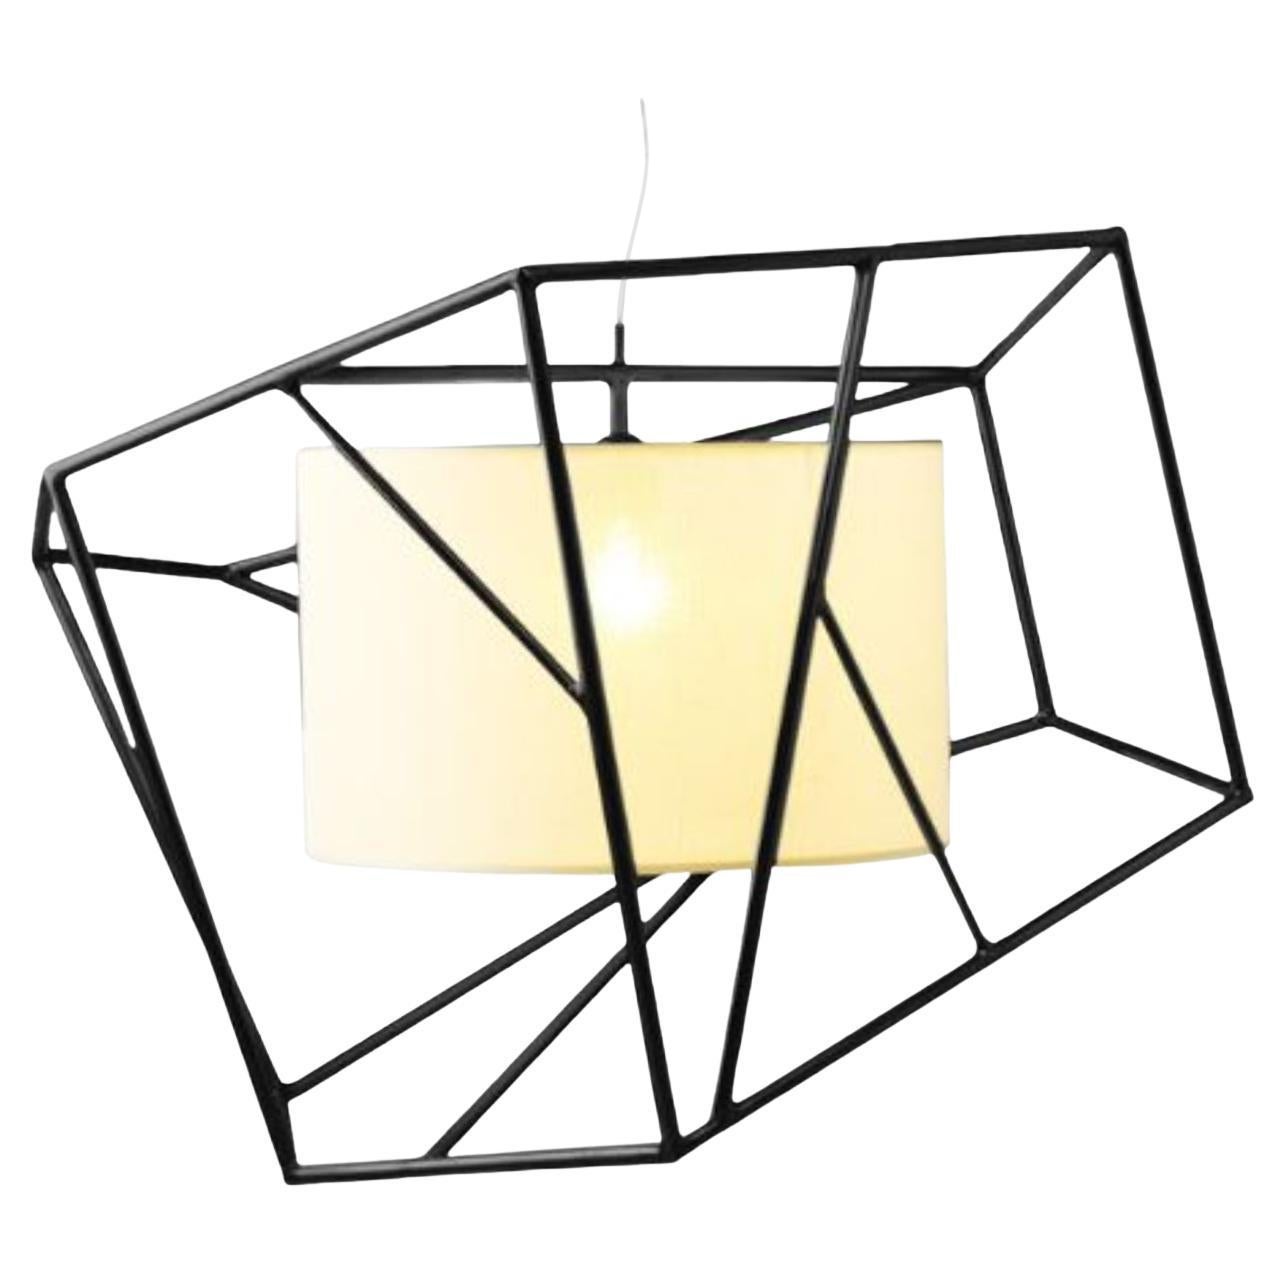 Black Star Suspension Lamp by Dooq For Sale